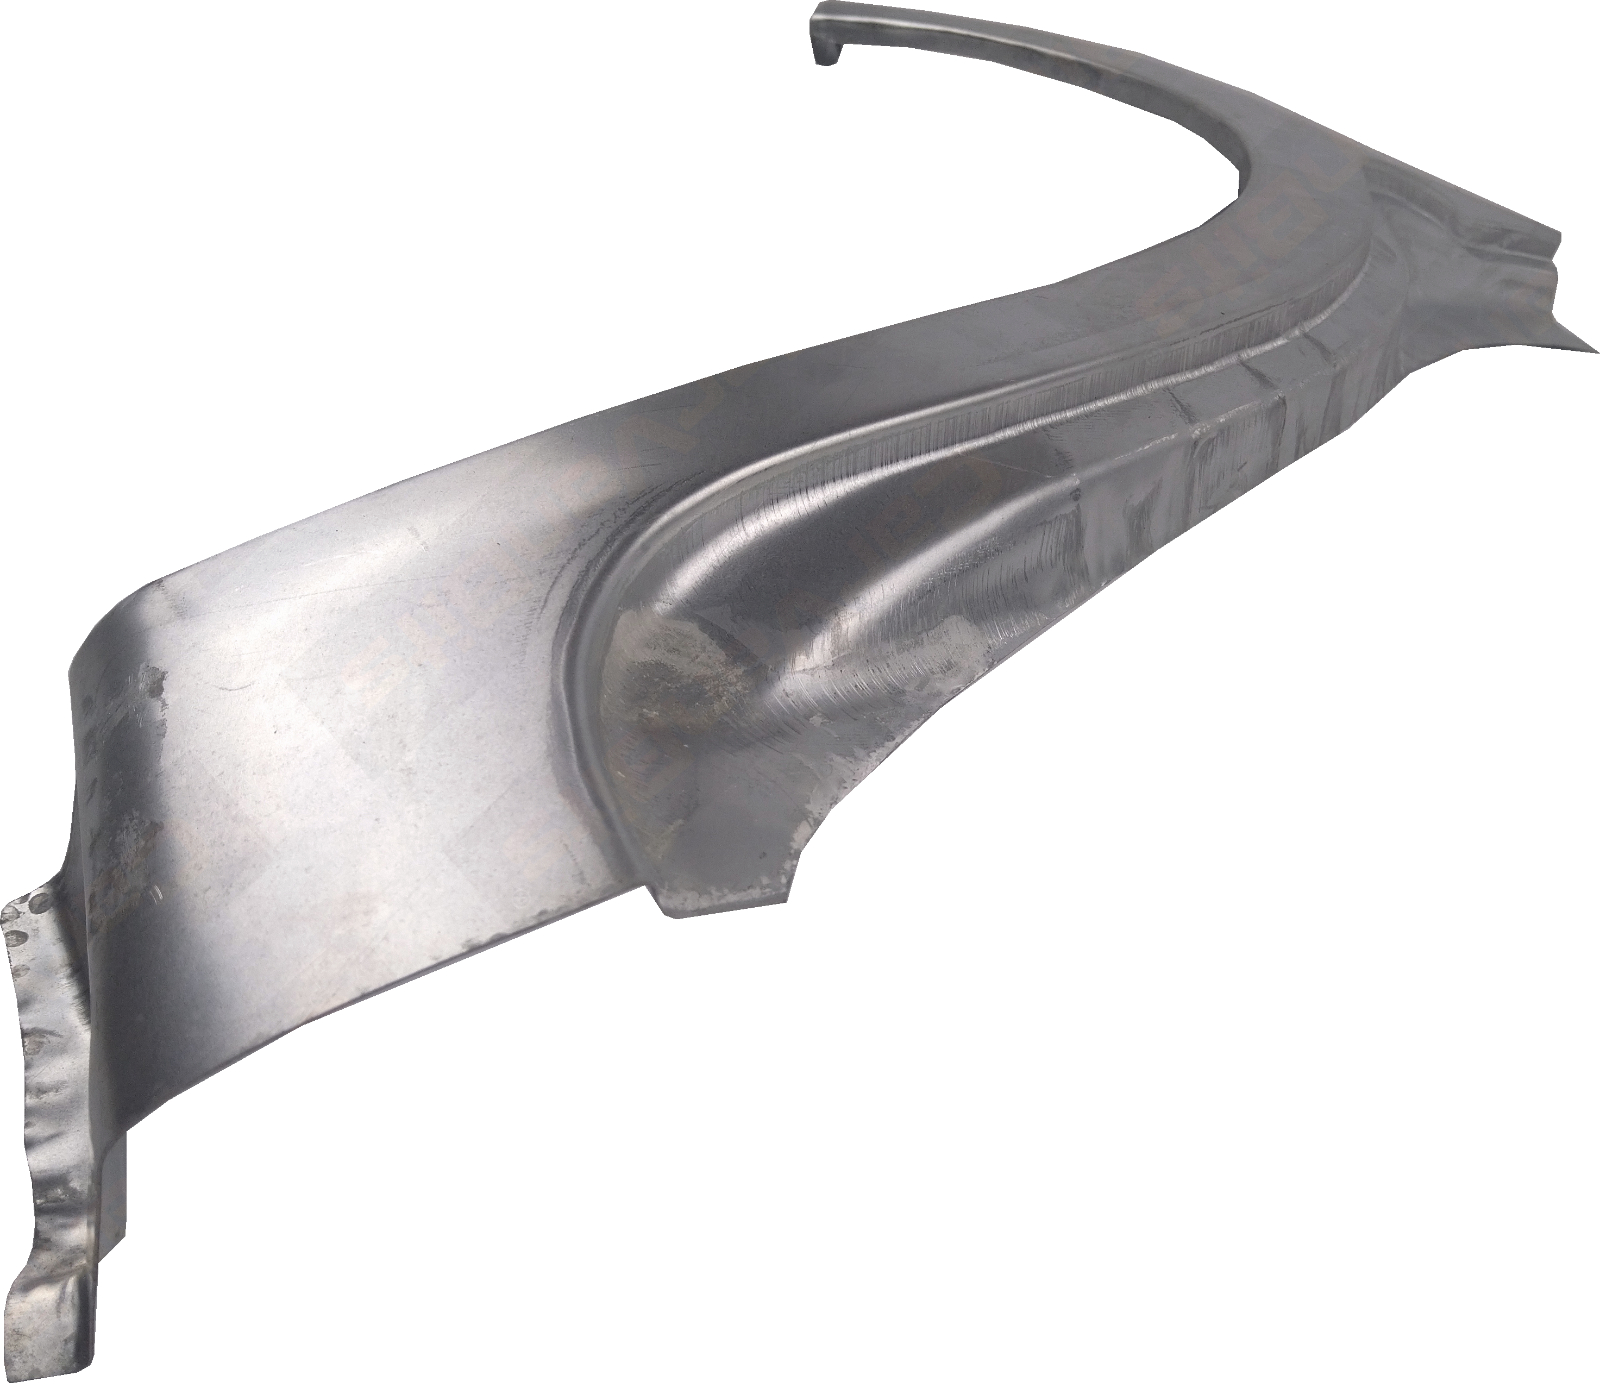 FOR FORD FOCUS MK2 04-11 4D / 5D REAR WHEEL ARCH REPAIR BODY PANEL RIGHT